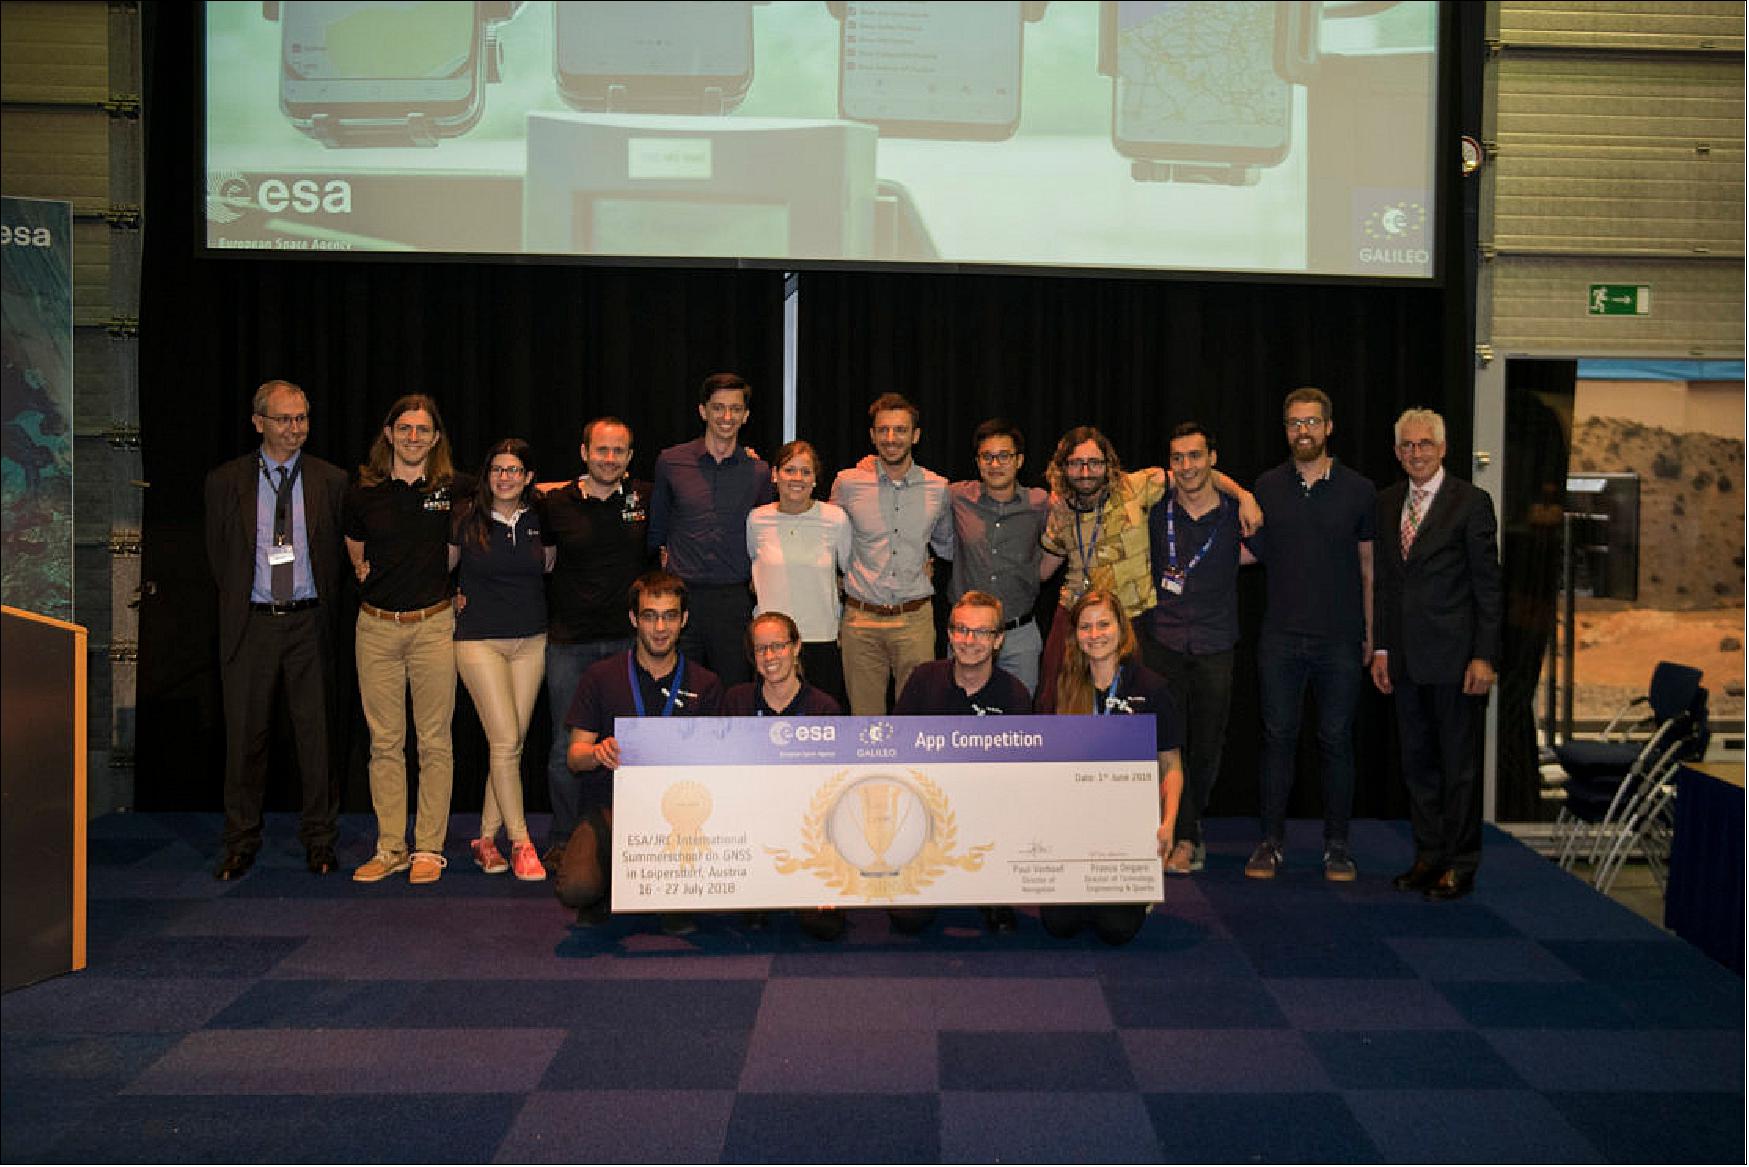 Figure 72: The winning Galfins team of ESA's Galileo smartphone app flanked by members of the other two teams of ESA trainees, ‘Chocolateam' and ‘Team 5G', at the end of the competition's final presentation at ESA's ESTEC technical center on 31 May 2018. At the far left is Riccardo De Gaudenzi, head of ESA's Radio Frequency Systems and Payloads Office; to the far right is Javier Benedicto, ESA's Galileo program manager (image credit: ESA–G. Porter, CC BY-SA 3.0 IGO)